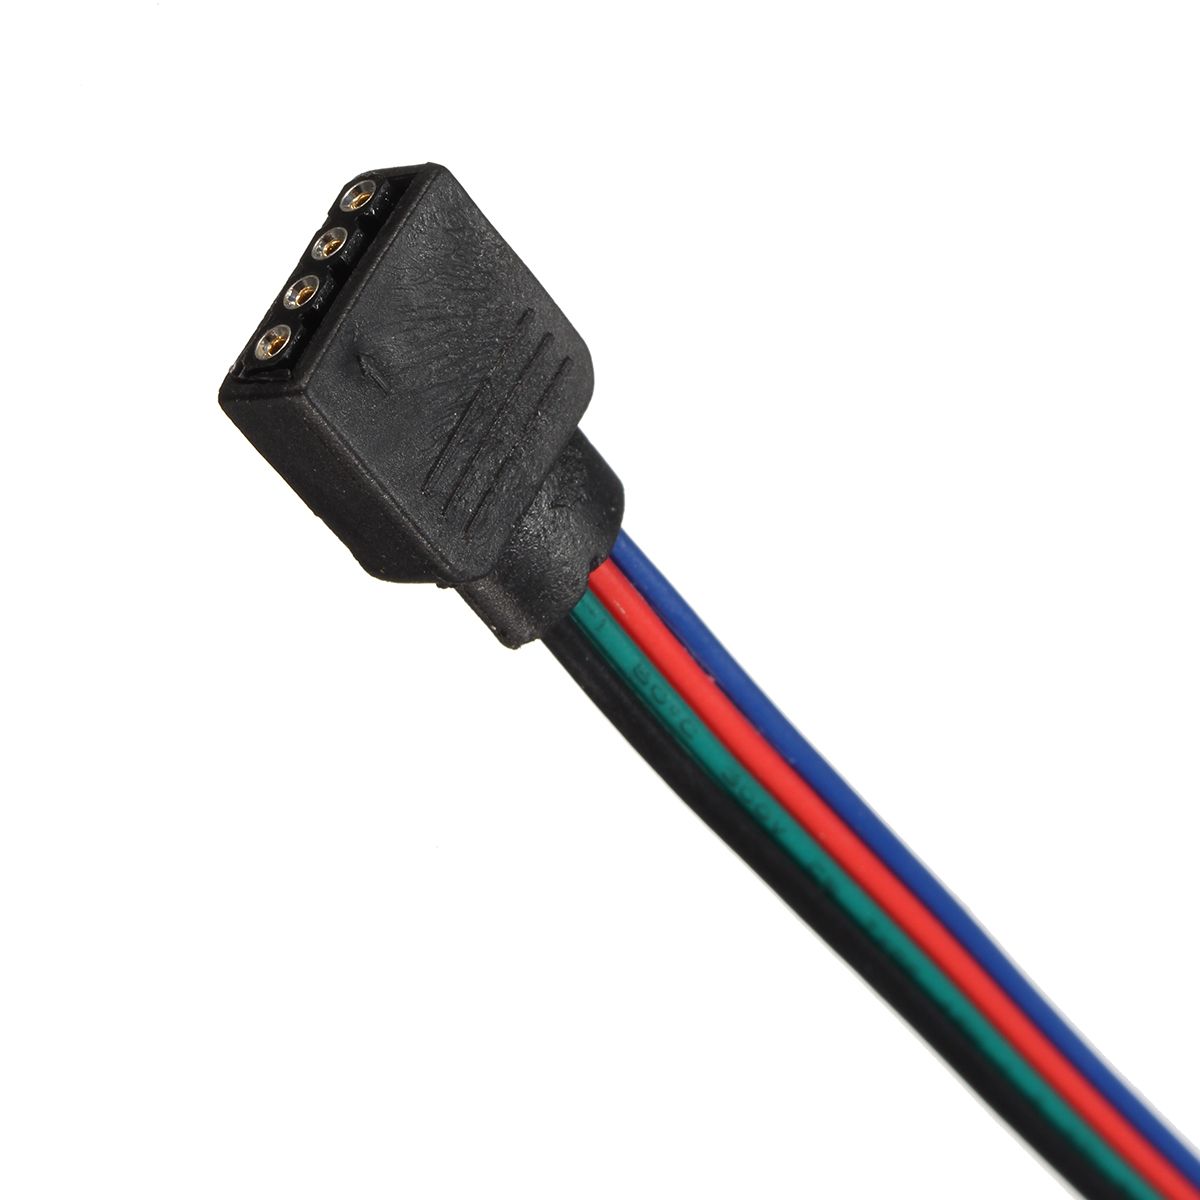 8MM-4-Pin-Female-Connector-No-Soldering-Cable-for-3528-5050-RGB-LED-Strip-Light-1244362